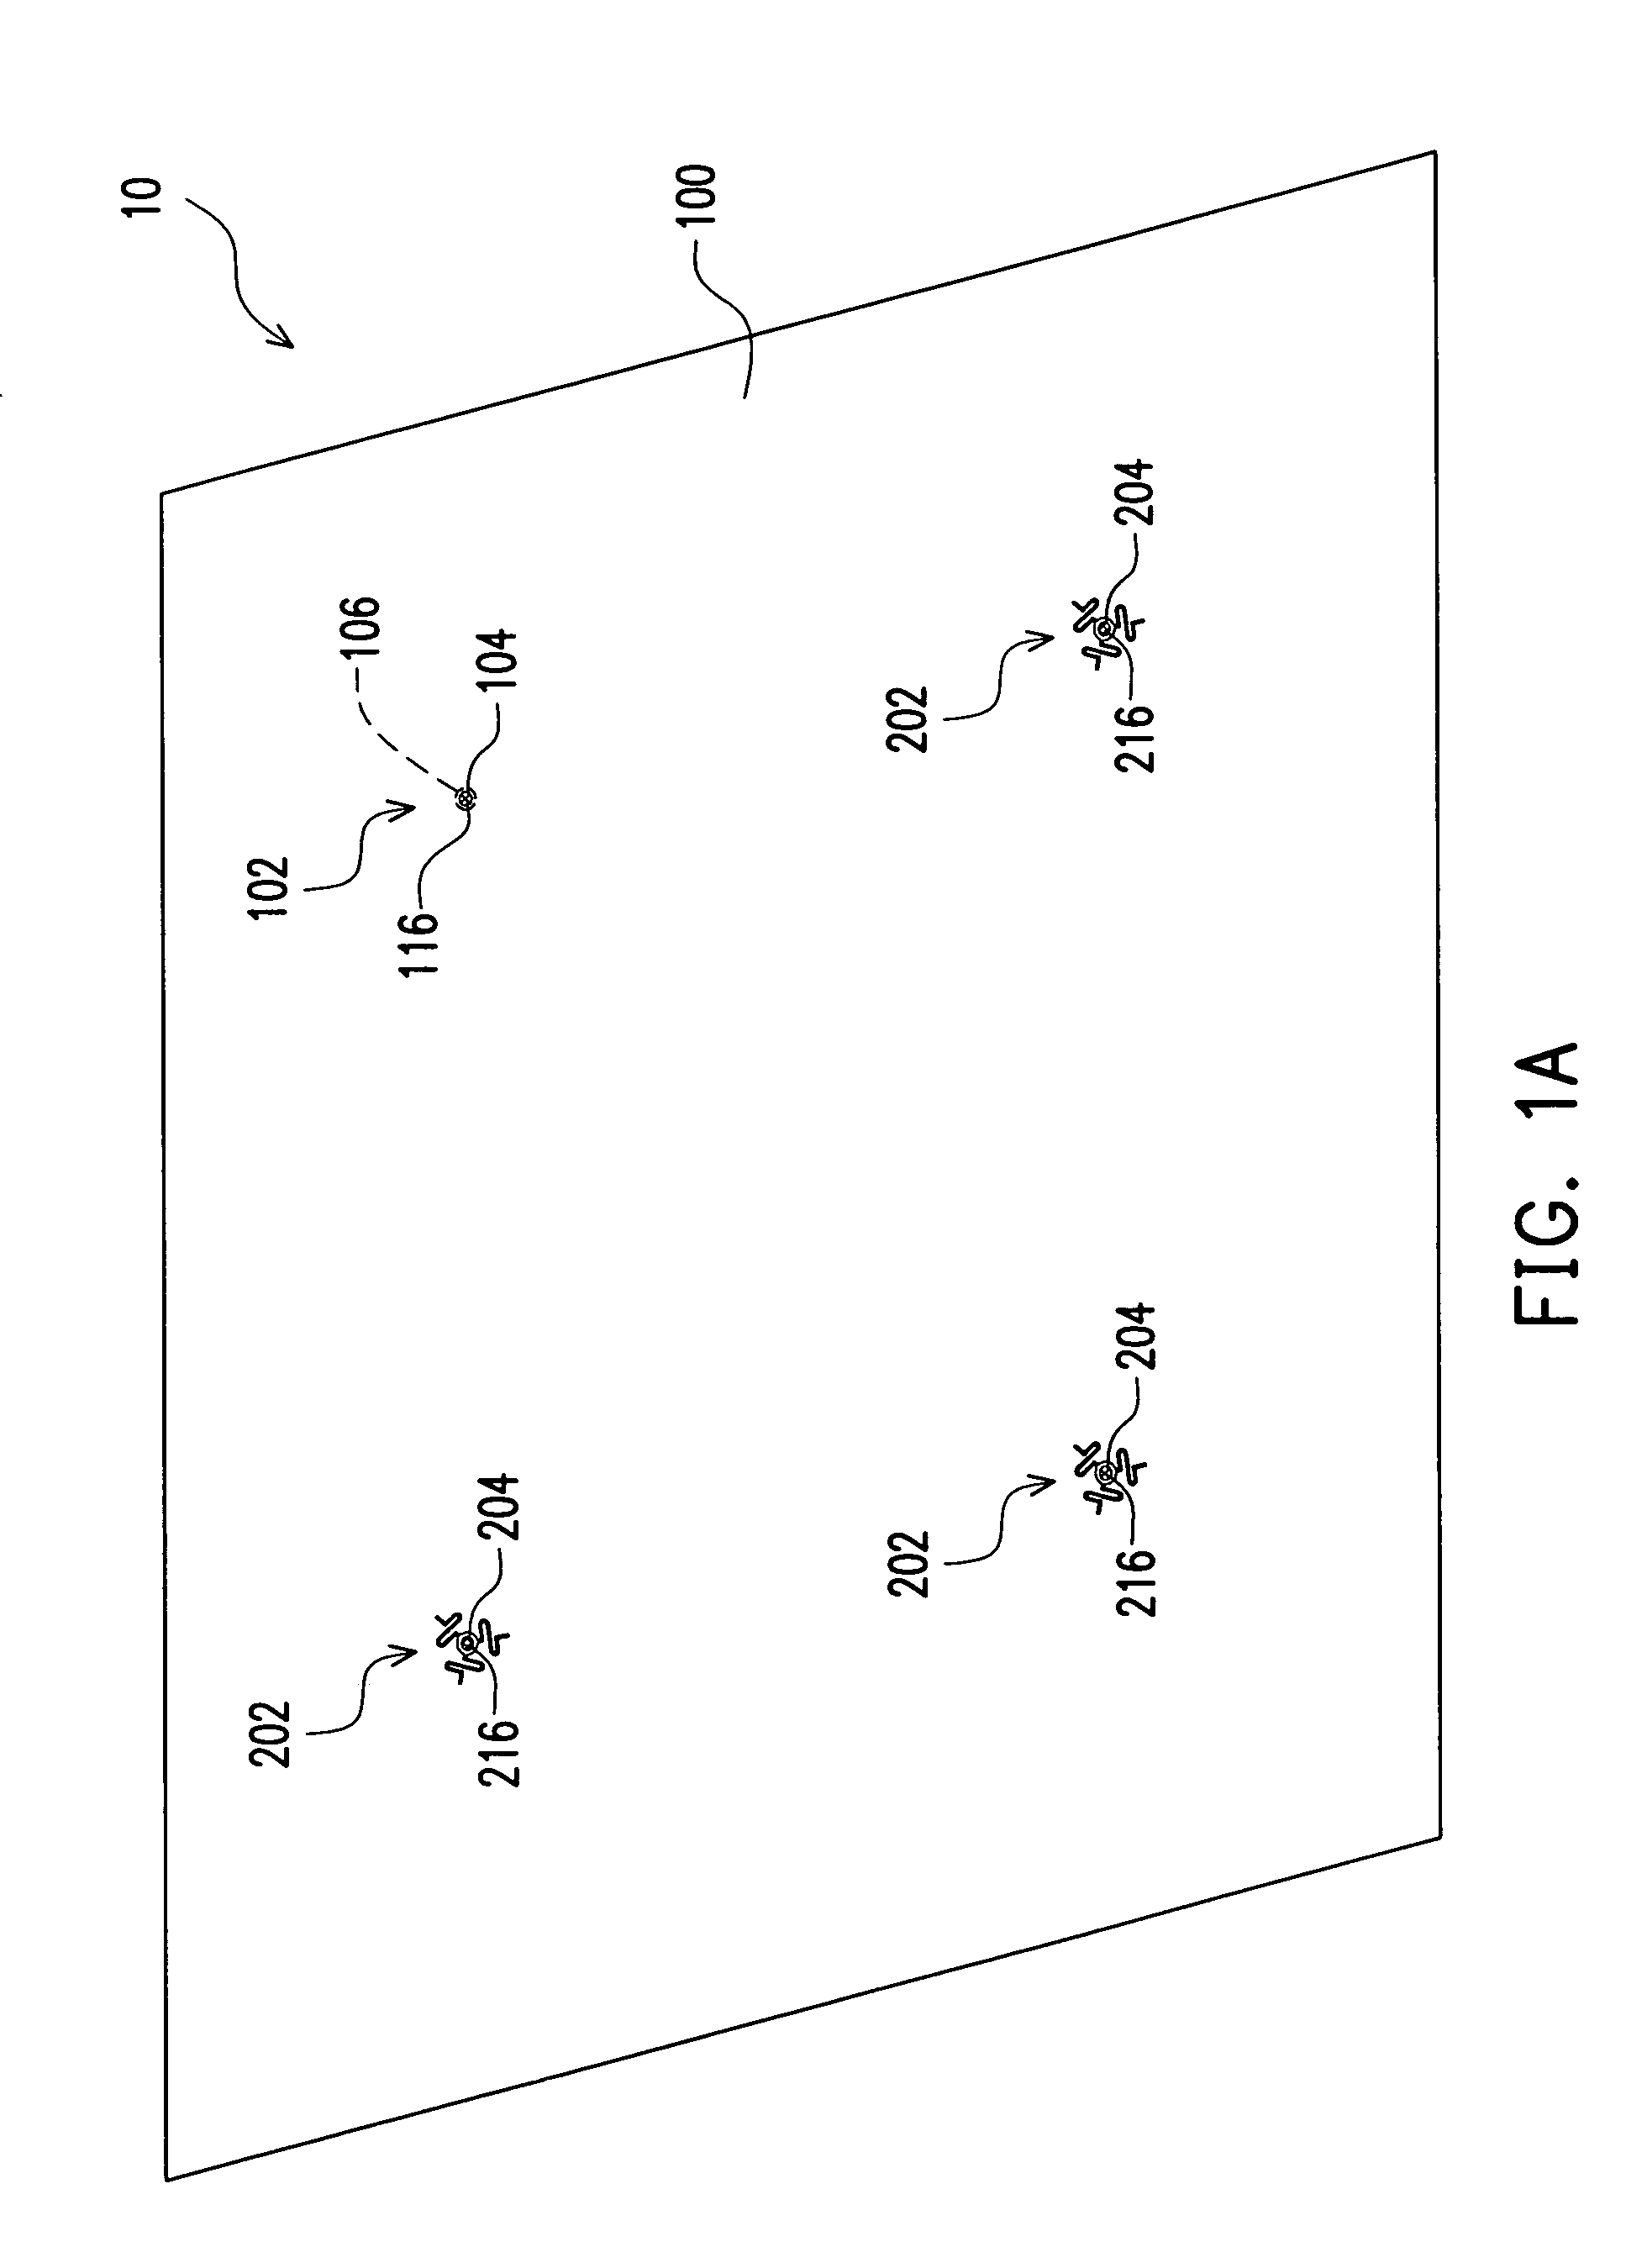 Clamping device for flexible substrate